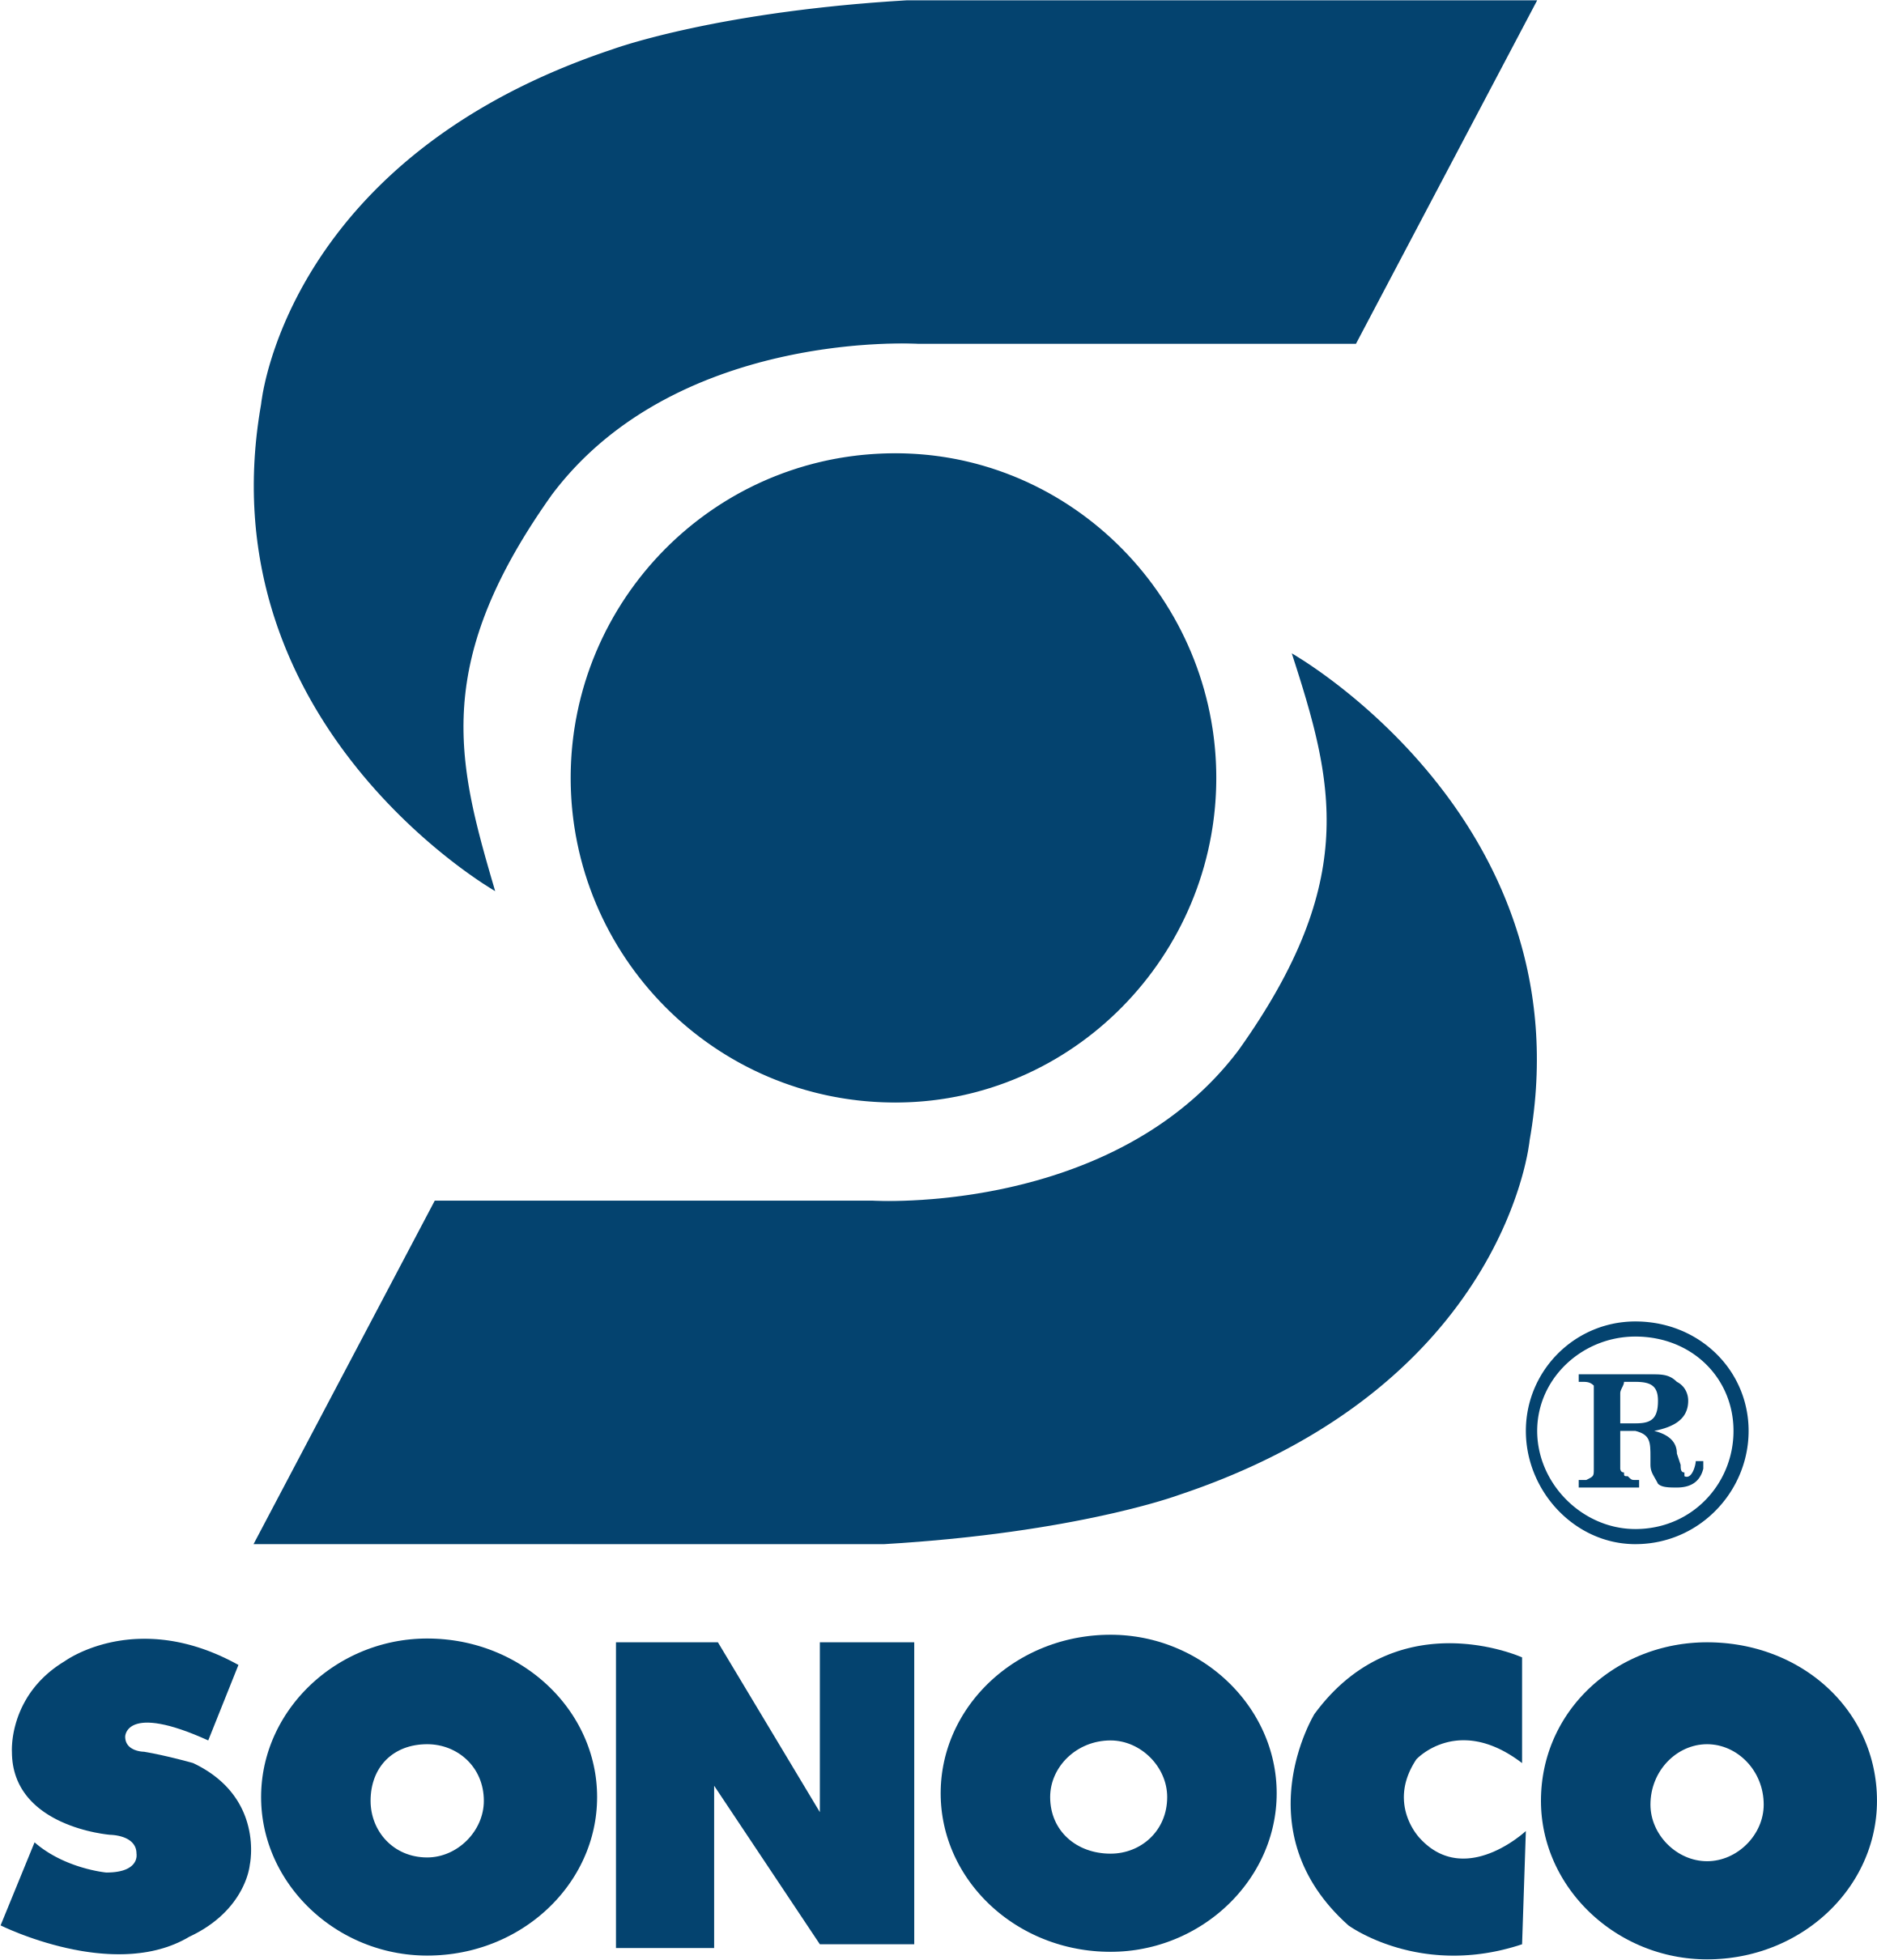 Sonoco Poland Packaging Services